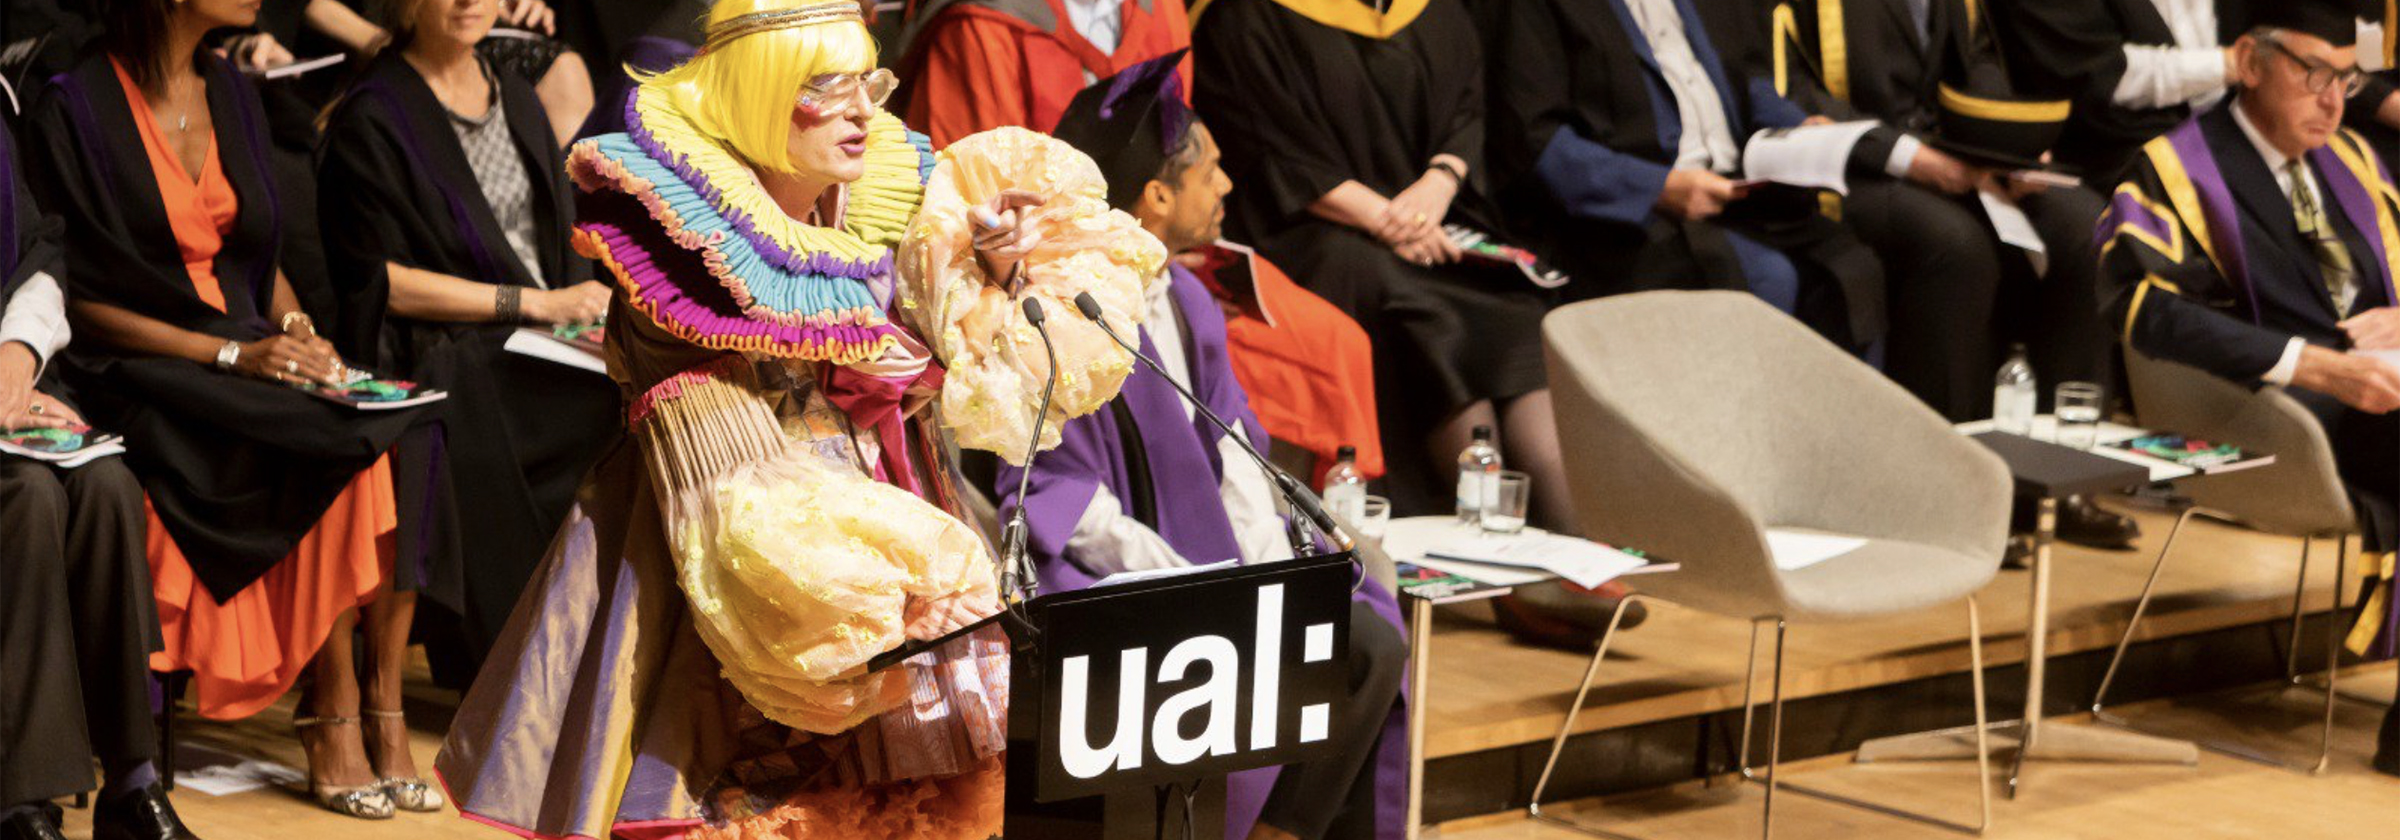 Grayson Perry wearing robes designed by Rachele Terrinoni standing on the stage at graduation